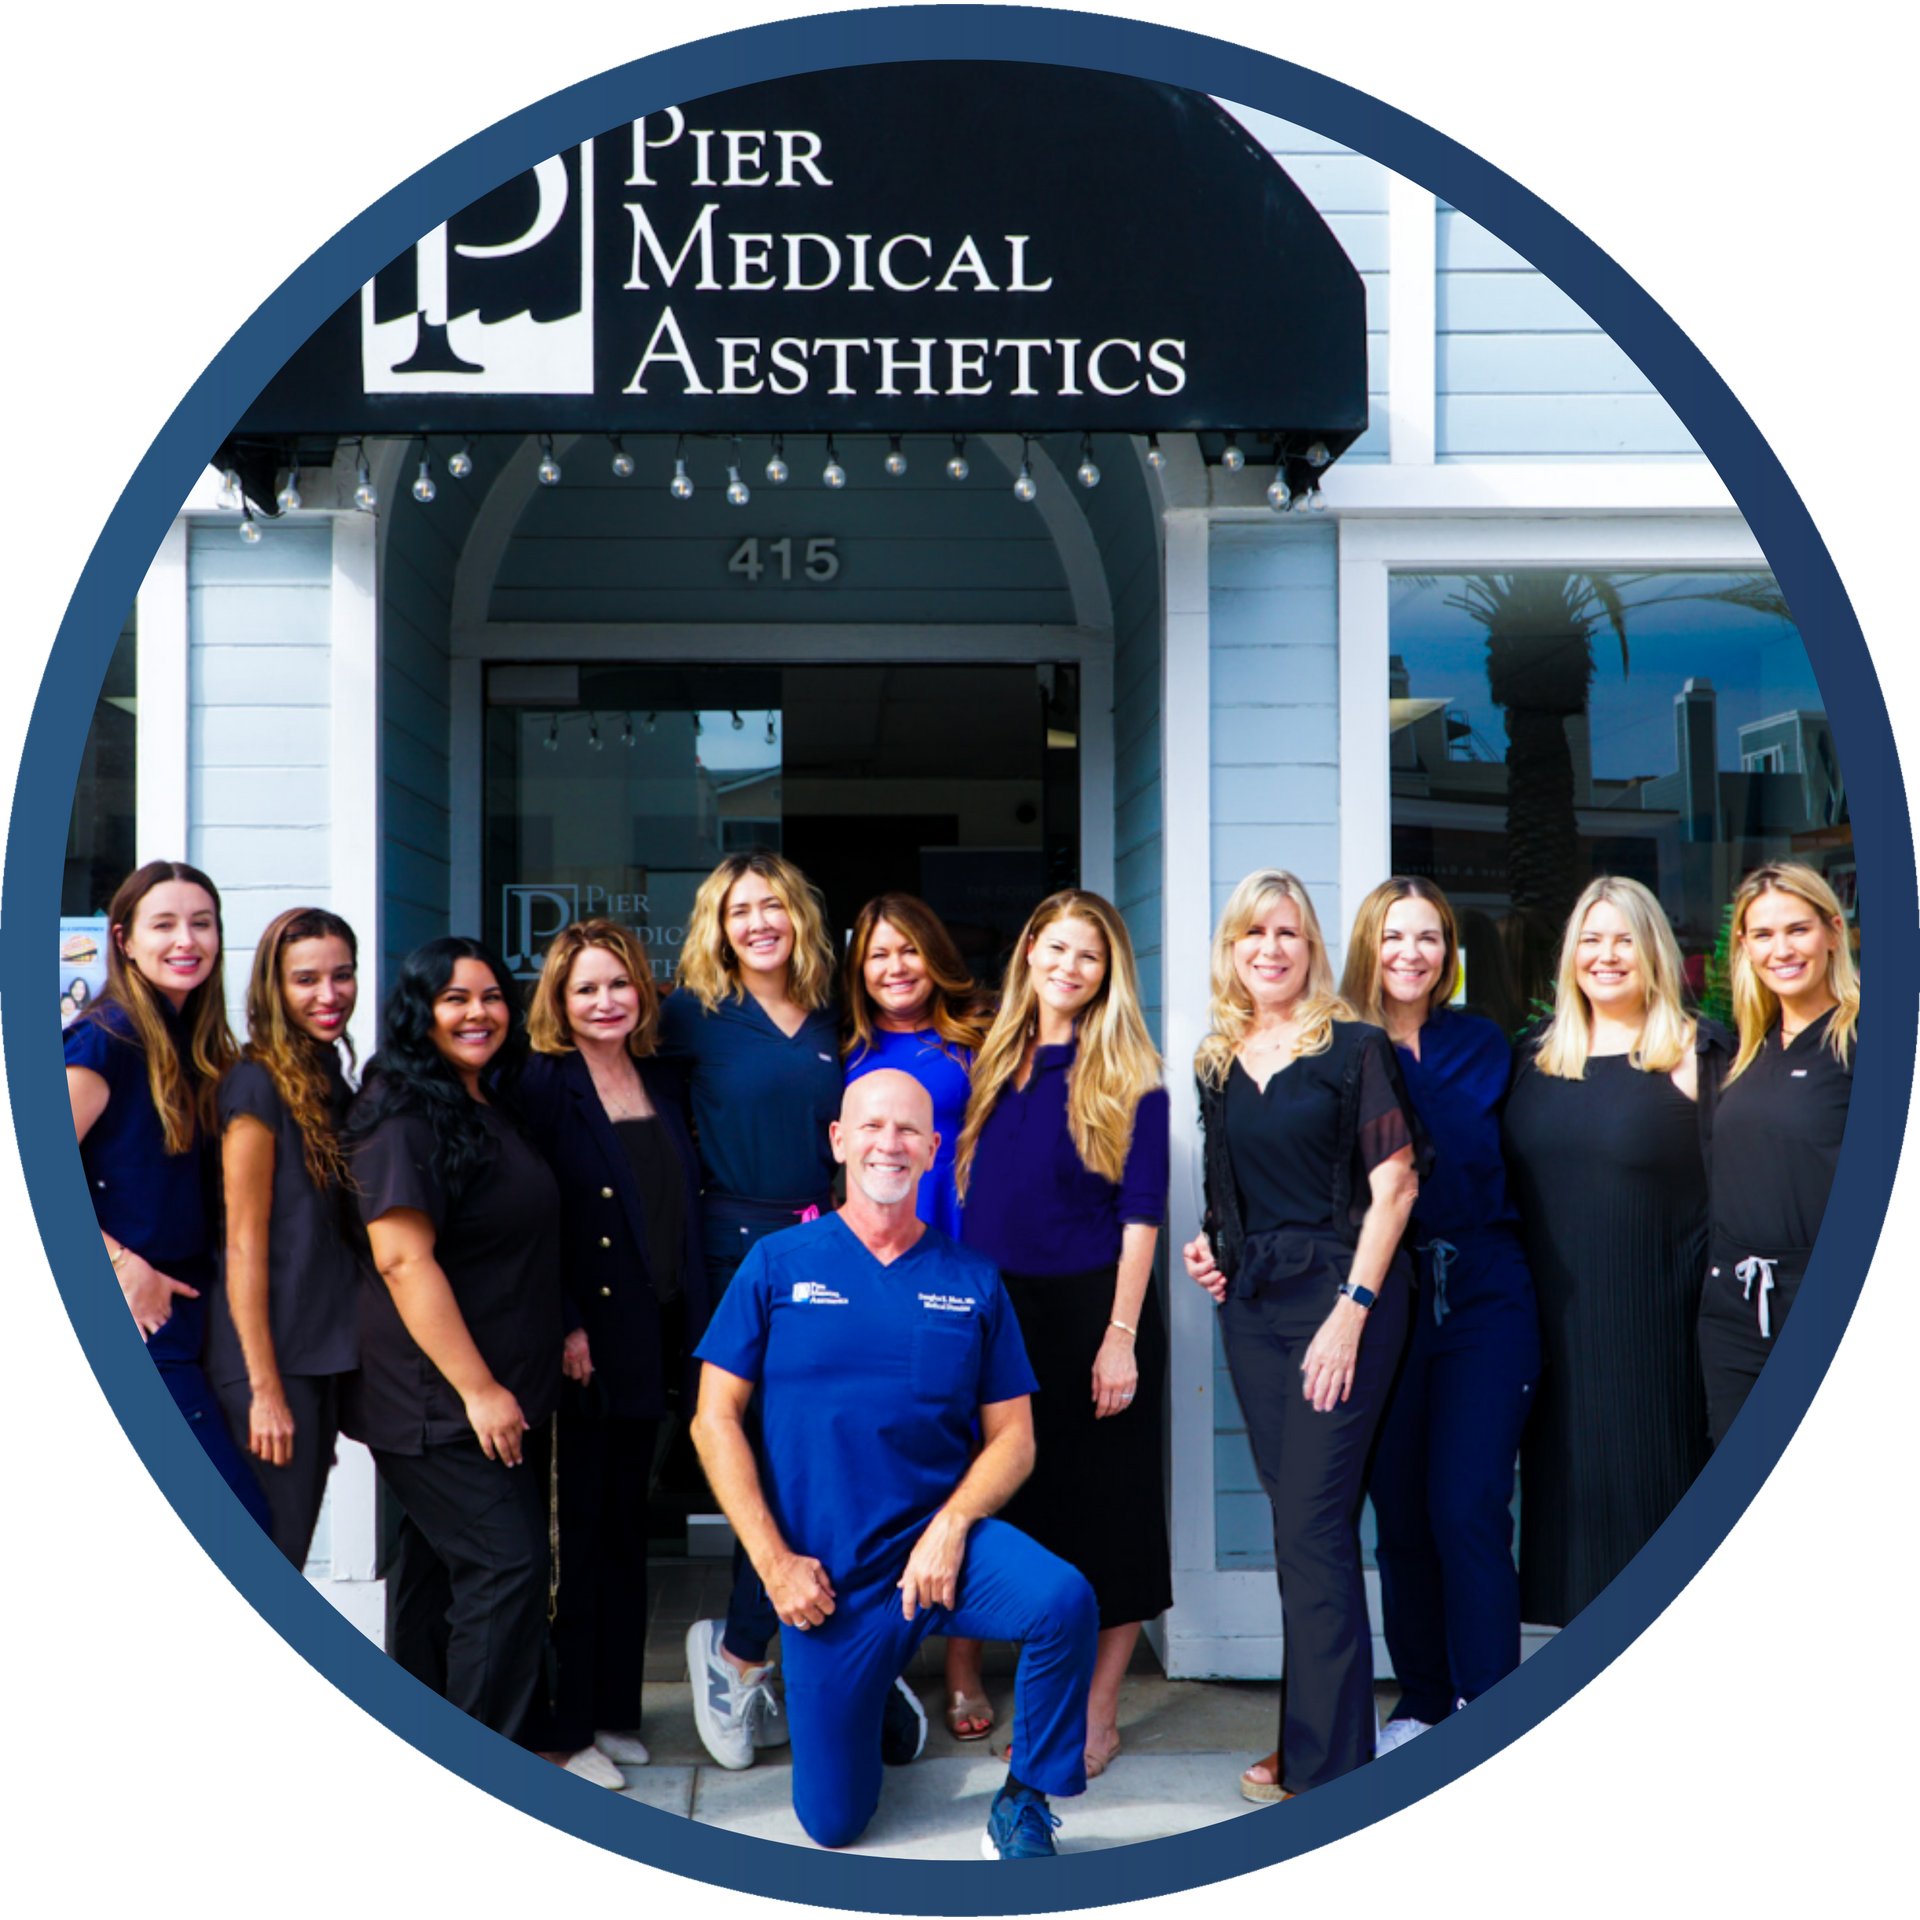 The providers posing for a picture in front of pier medical aesthetics